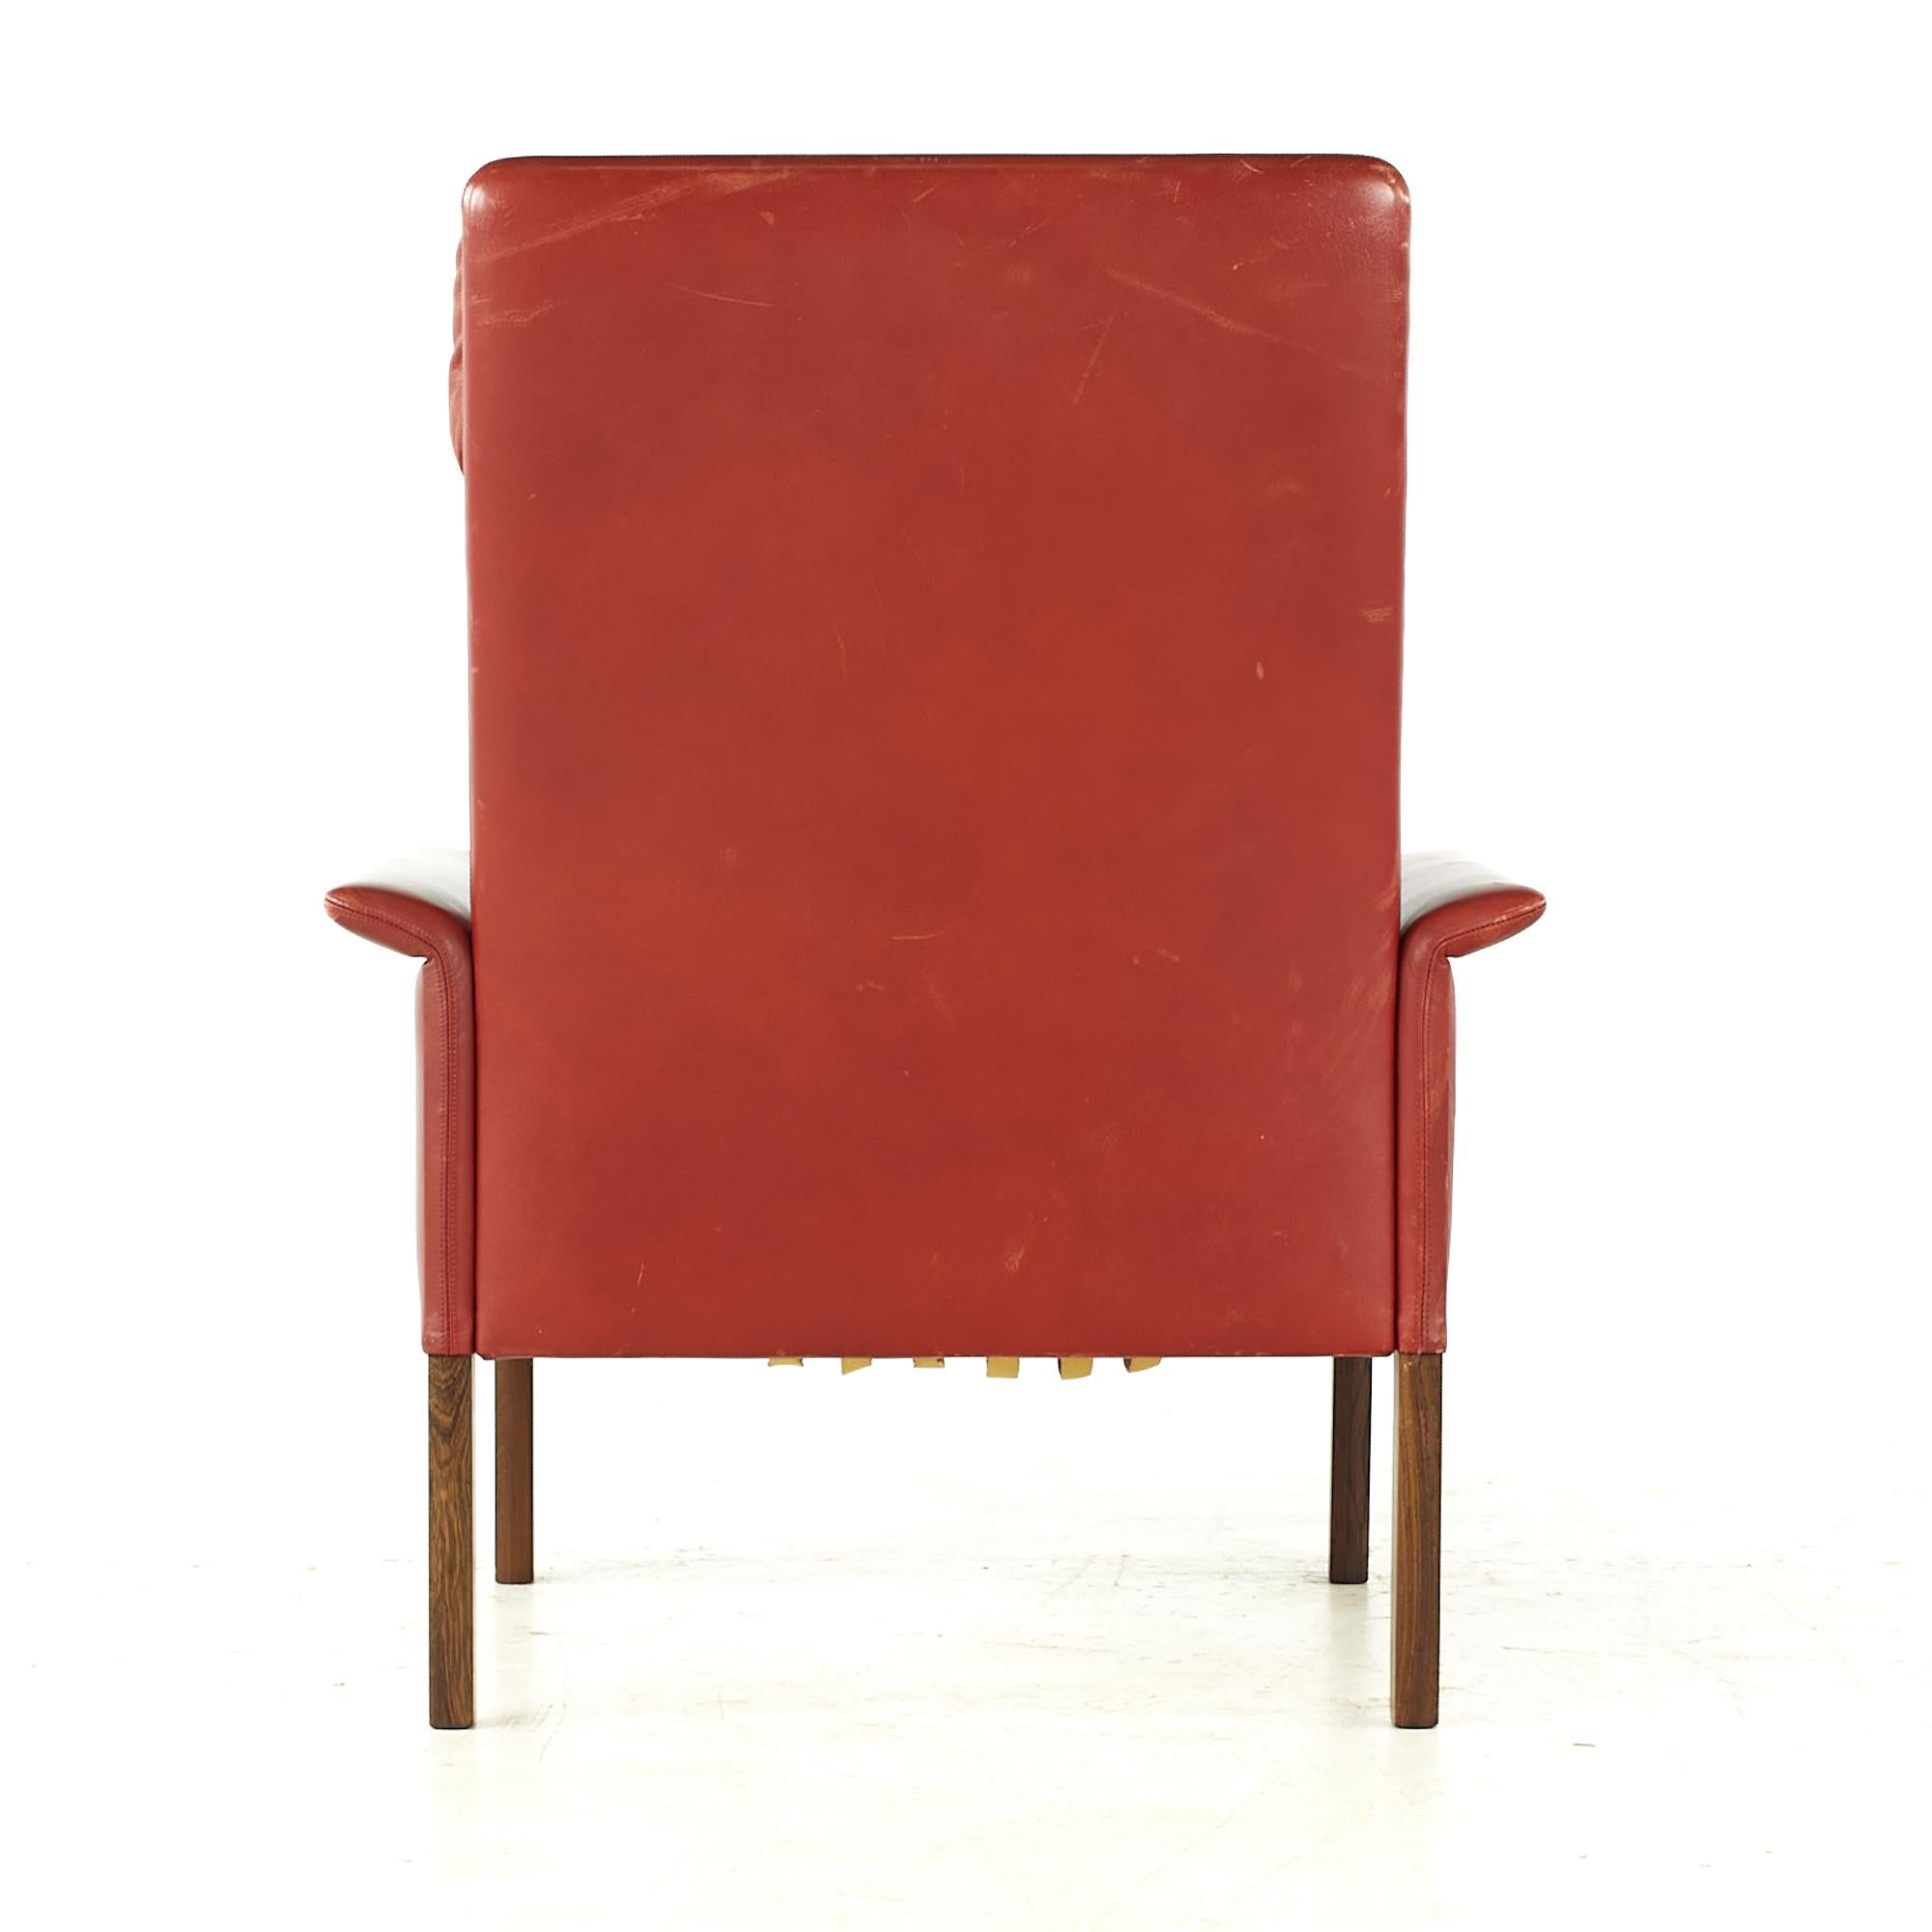 Hans Olsen Midcentury Danish Rosewood and Red Leather Chairs, Pair For Sale 3